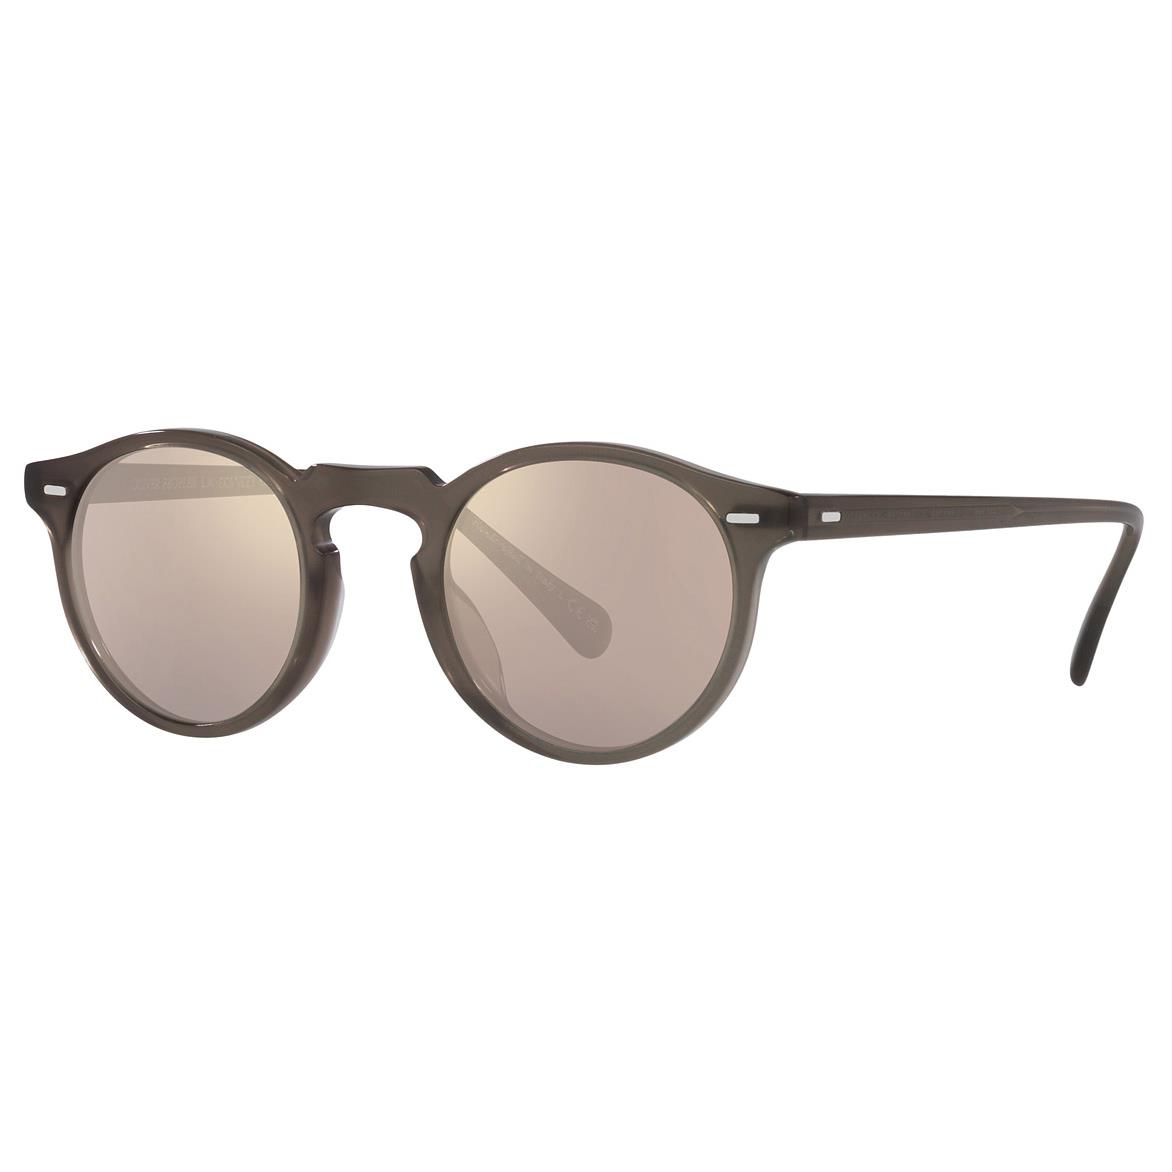 Oliver Peoples 0OV5217S Gregory Peck 14735D Taupe/chrome Taupe 47mm Sunglasses - Frame: , Lens: Chrome Taupe Brown